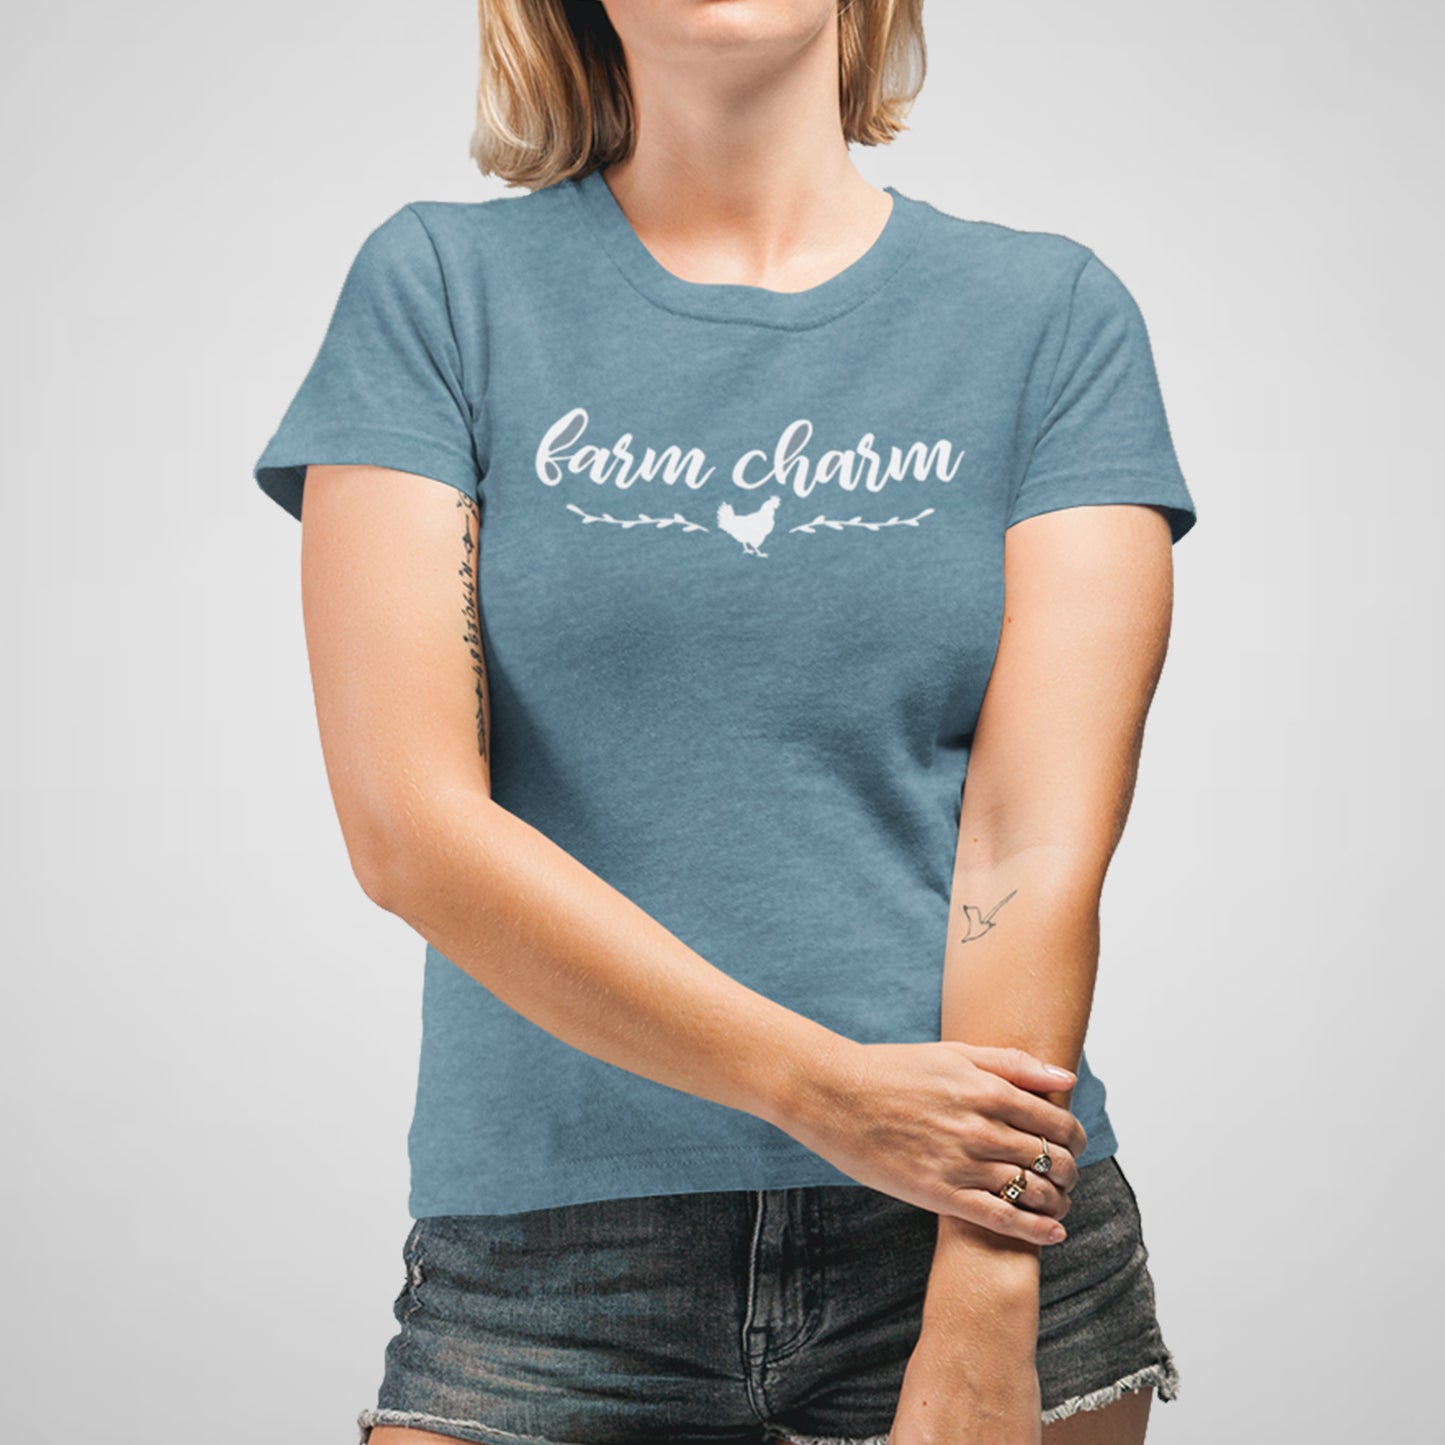 Farm Charm, Homestead, Chicken - Women's Relaxed Cotton/Poly Tee